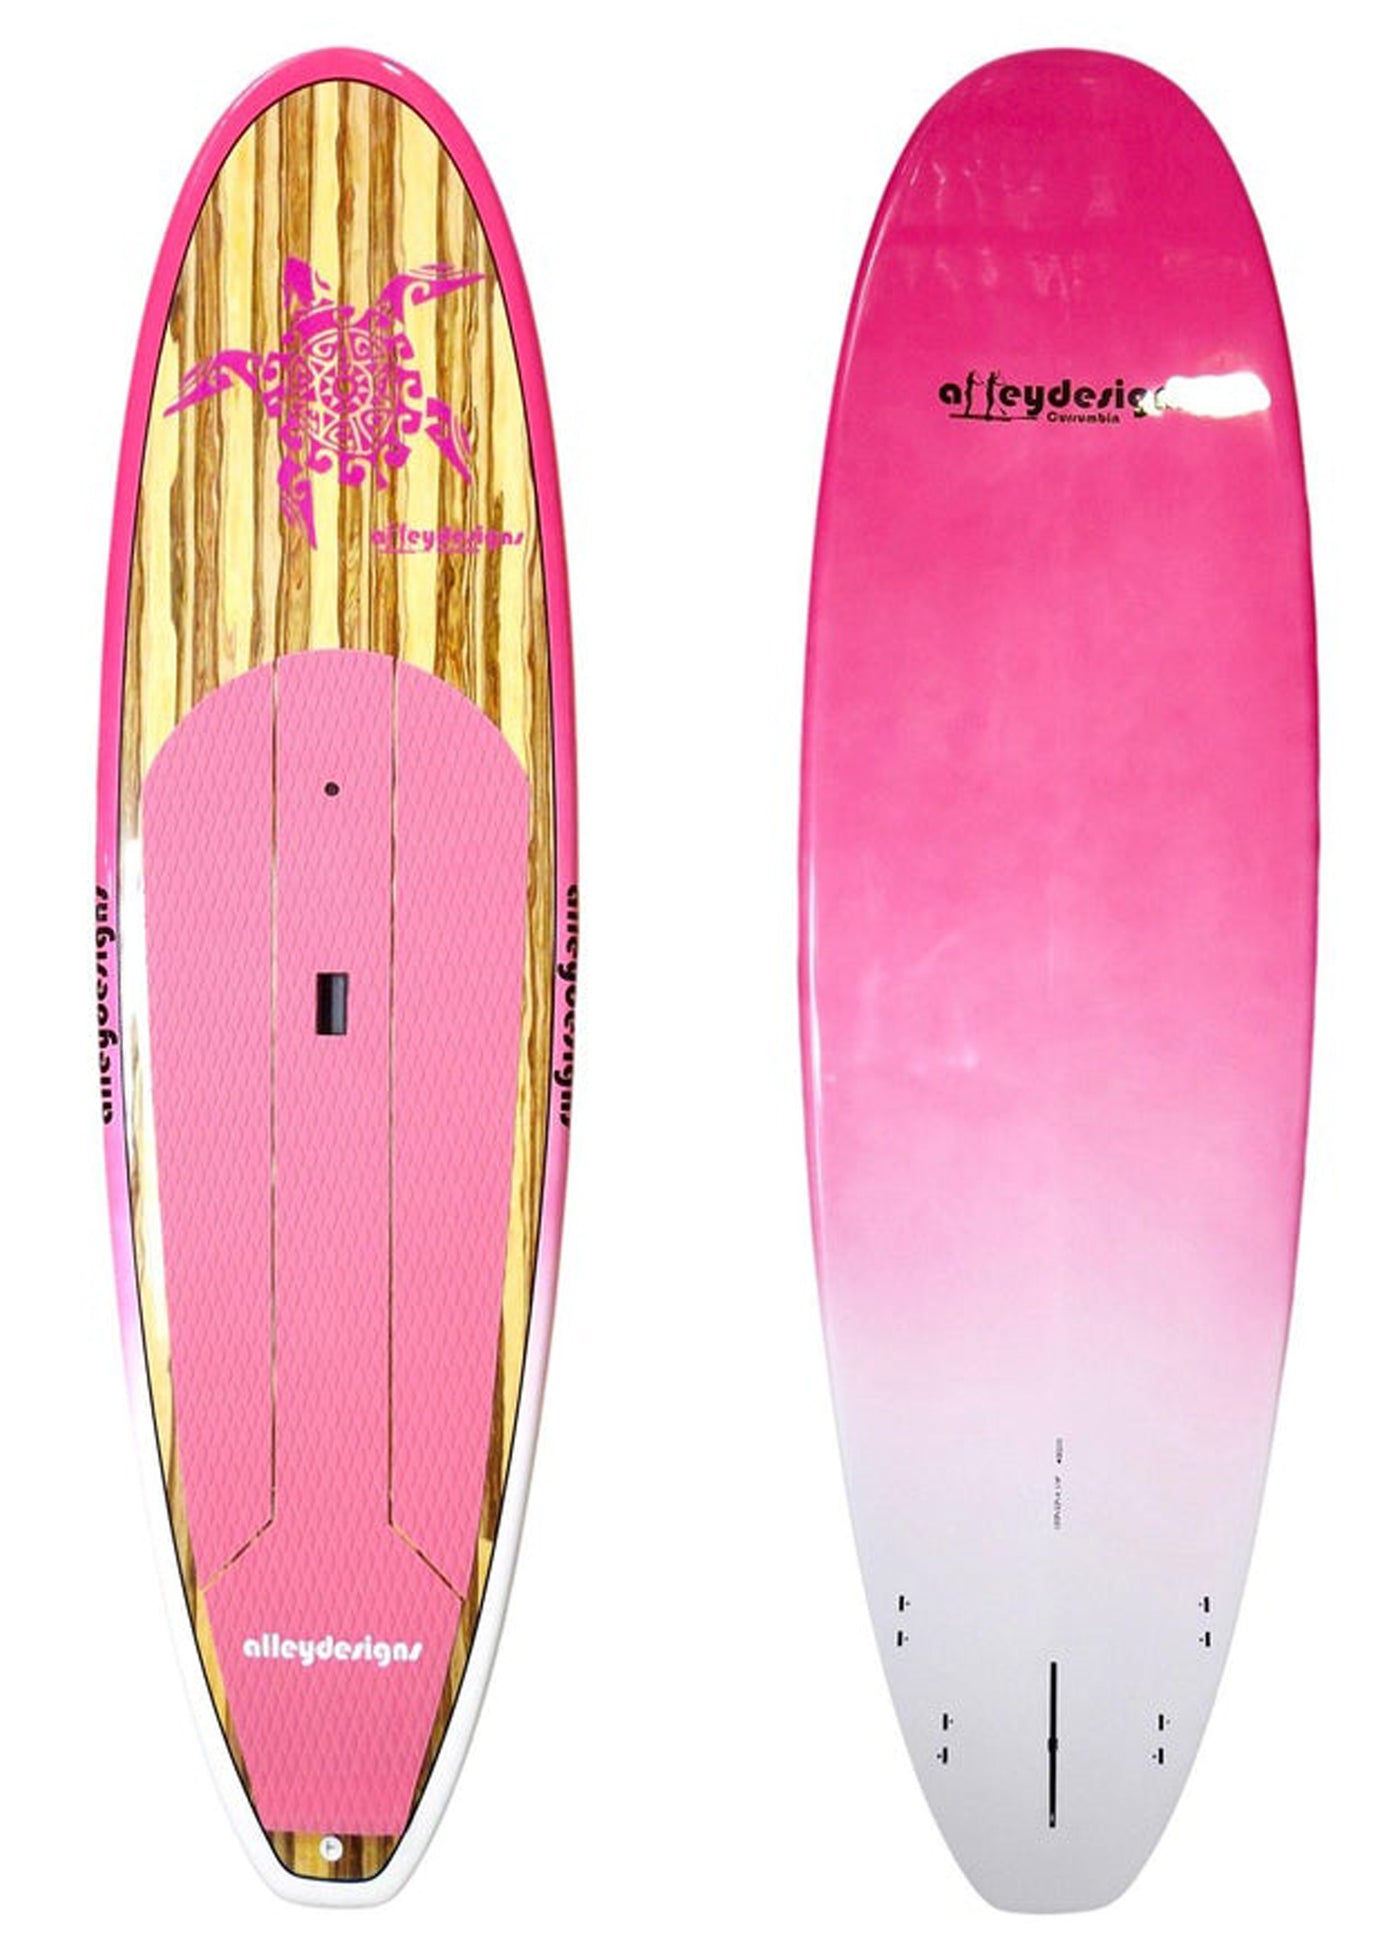 10' x 32" Timber Deck Pink Turtle Pink Rails Classic Alleydesigns SUP 9KG - Alleydesigns  Pty Ltd                                             ABN: 44165571264